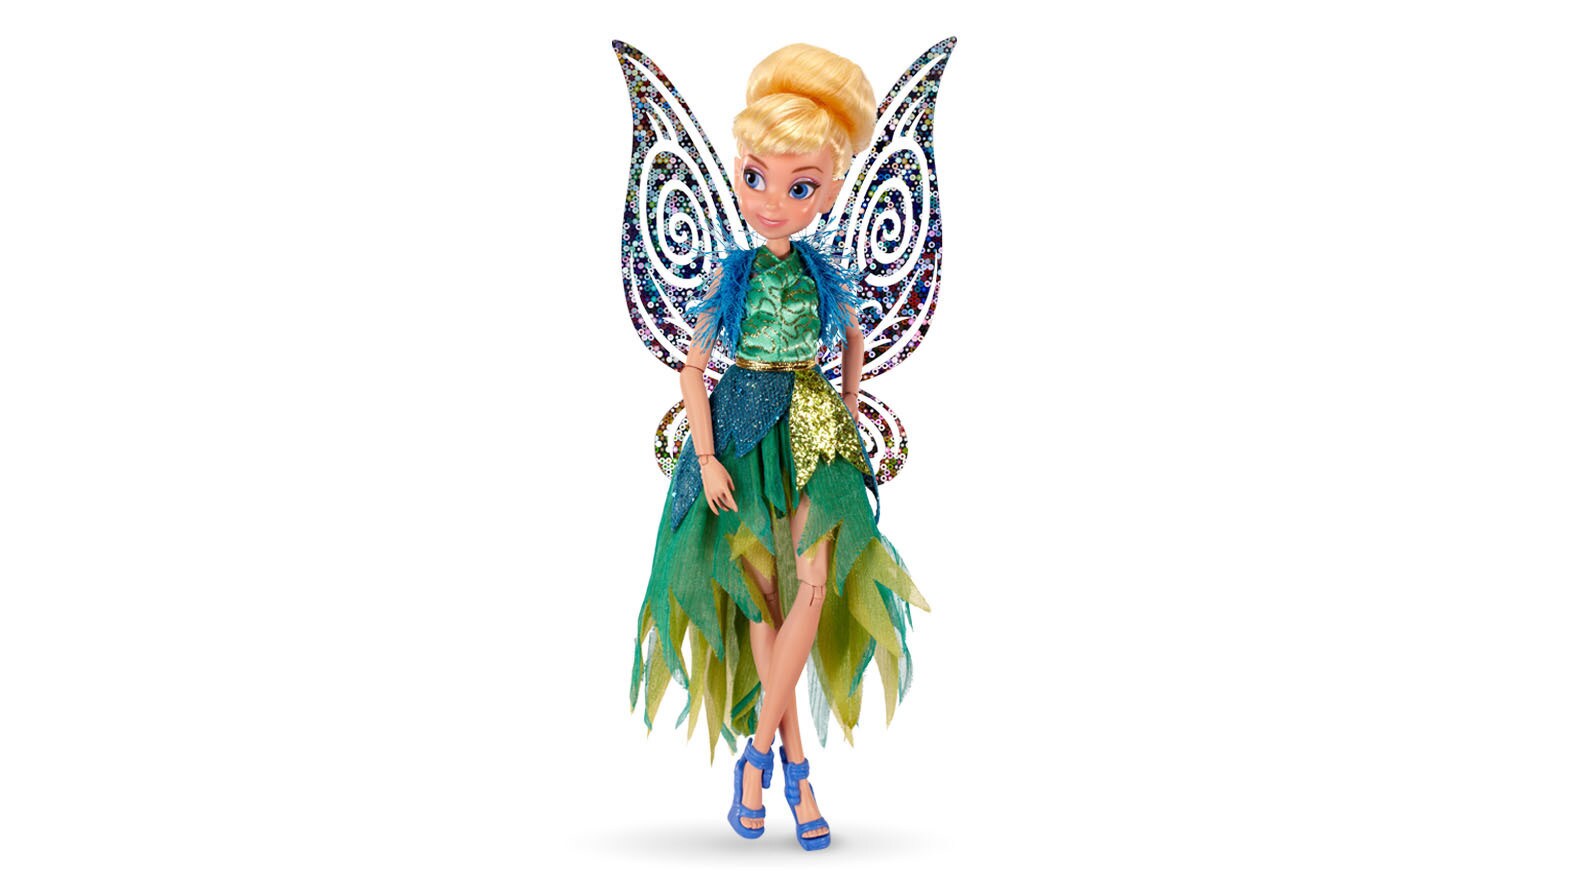 Tink is dressed to dazzle in a gown of green ferns and feathers embellished with tiny vines and d...